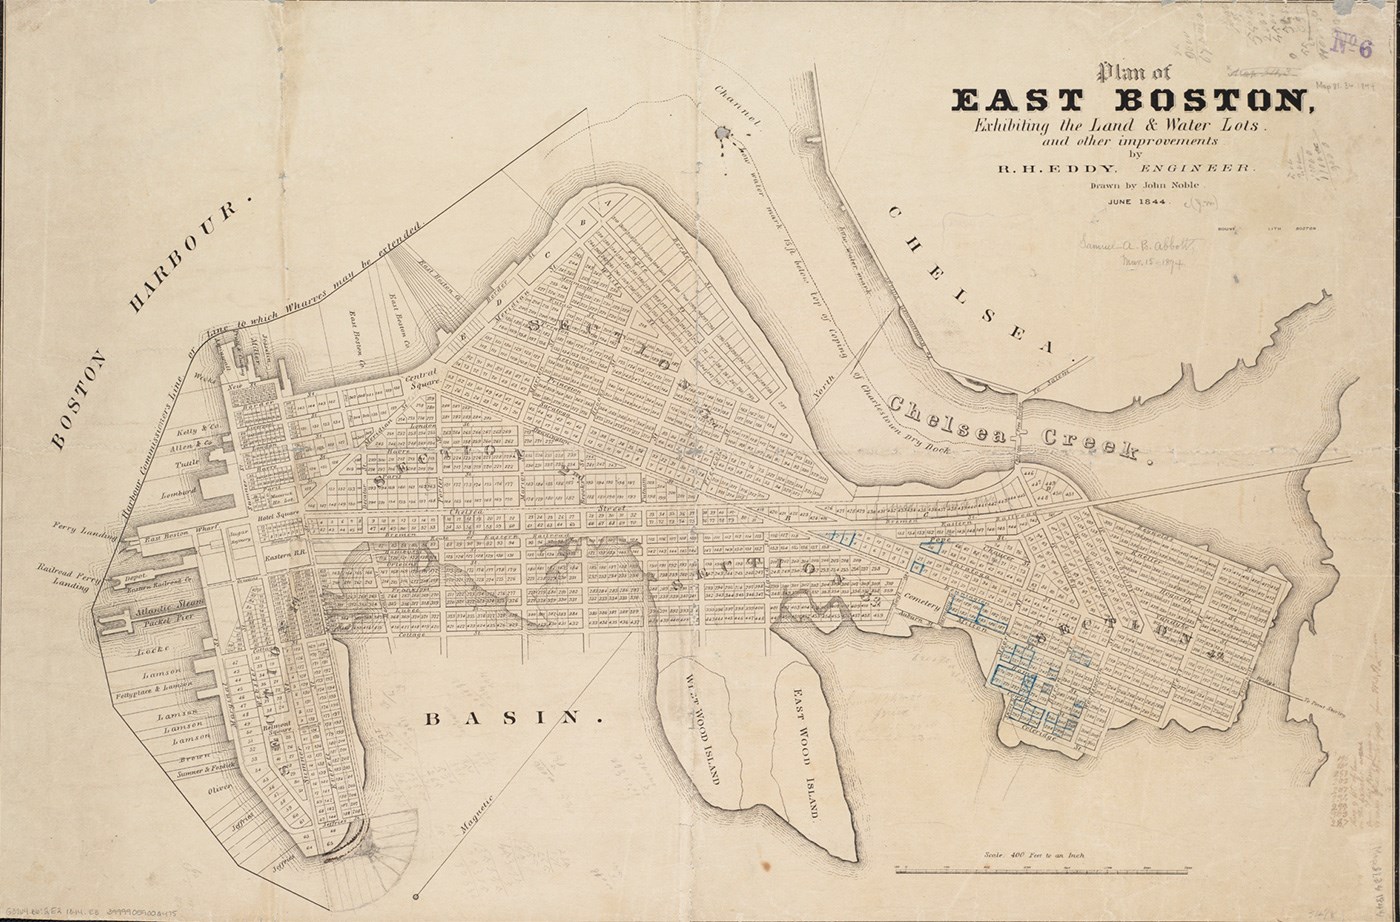 “Plan of East Boston” by Norman B. Leventhal Map Center is licensed under CC BY 2.0